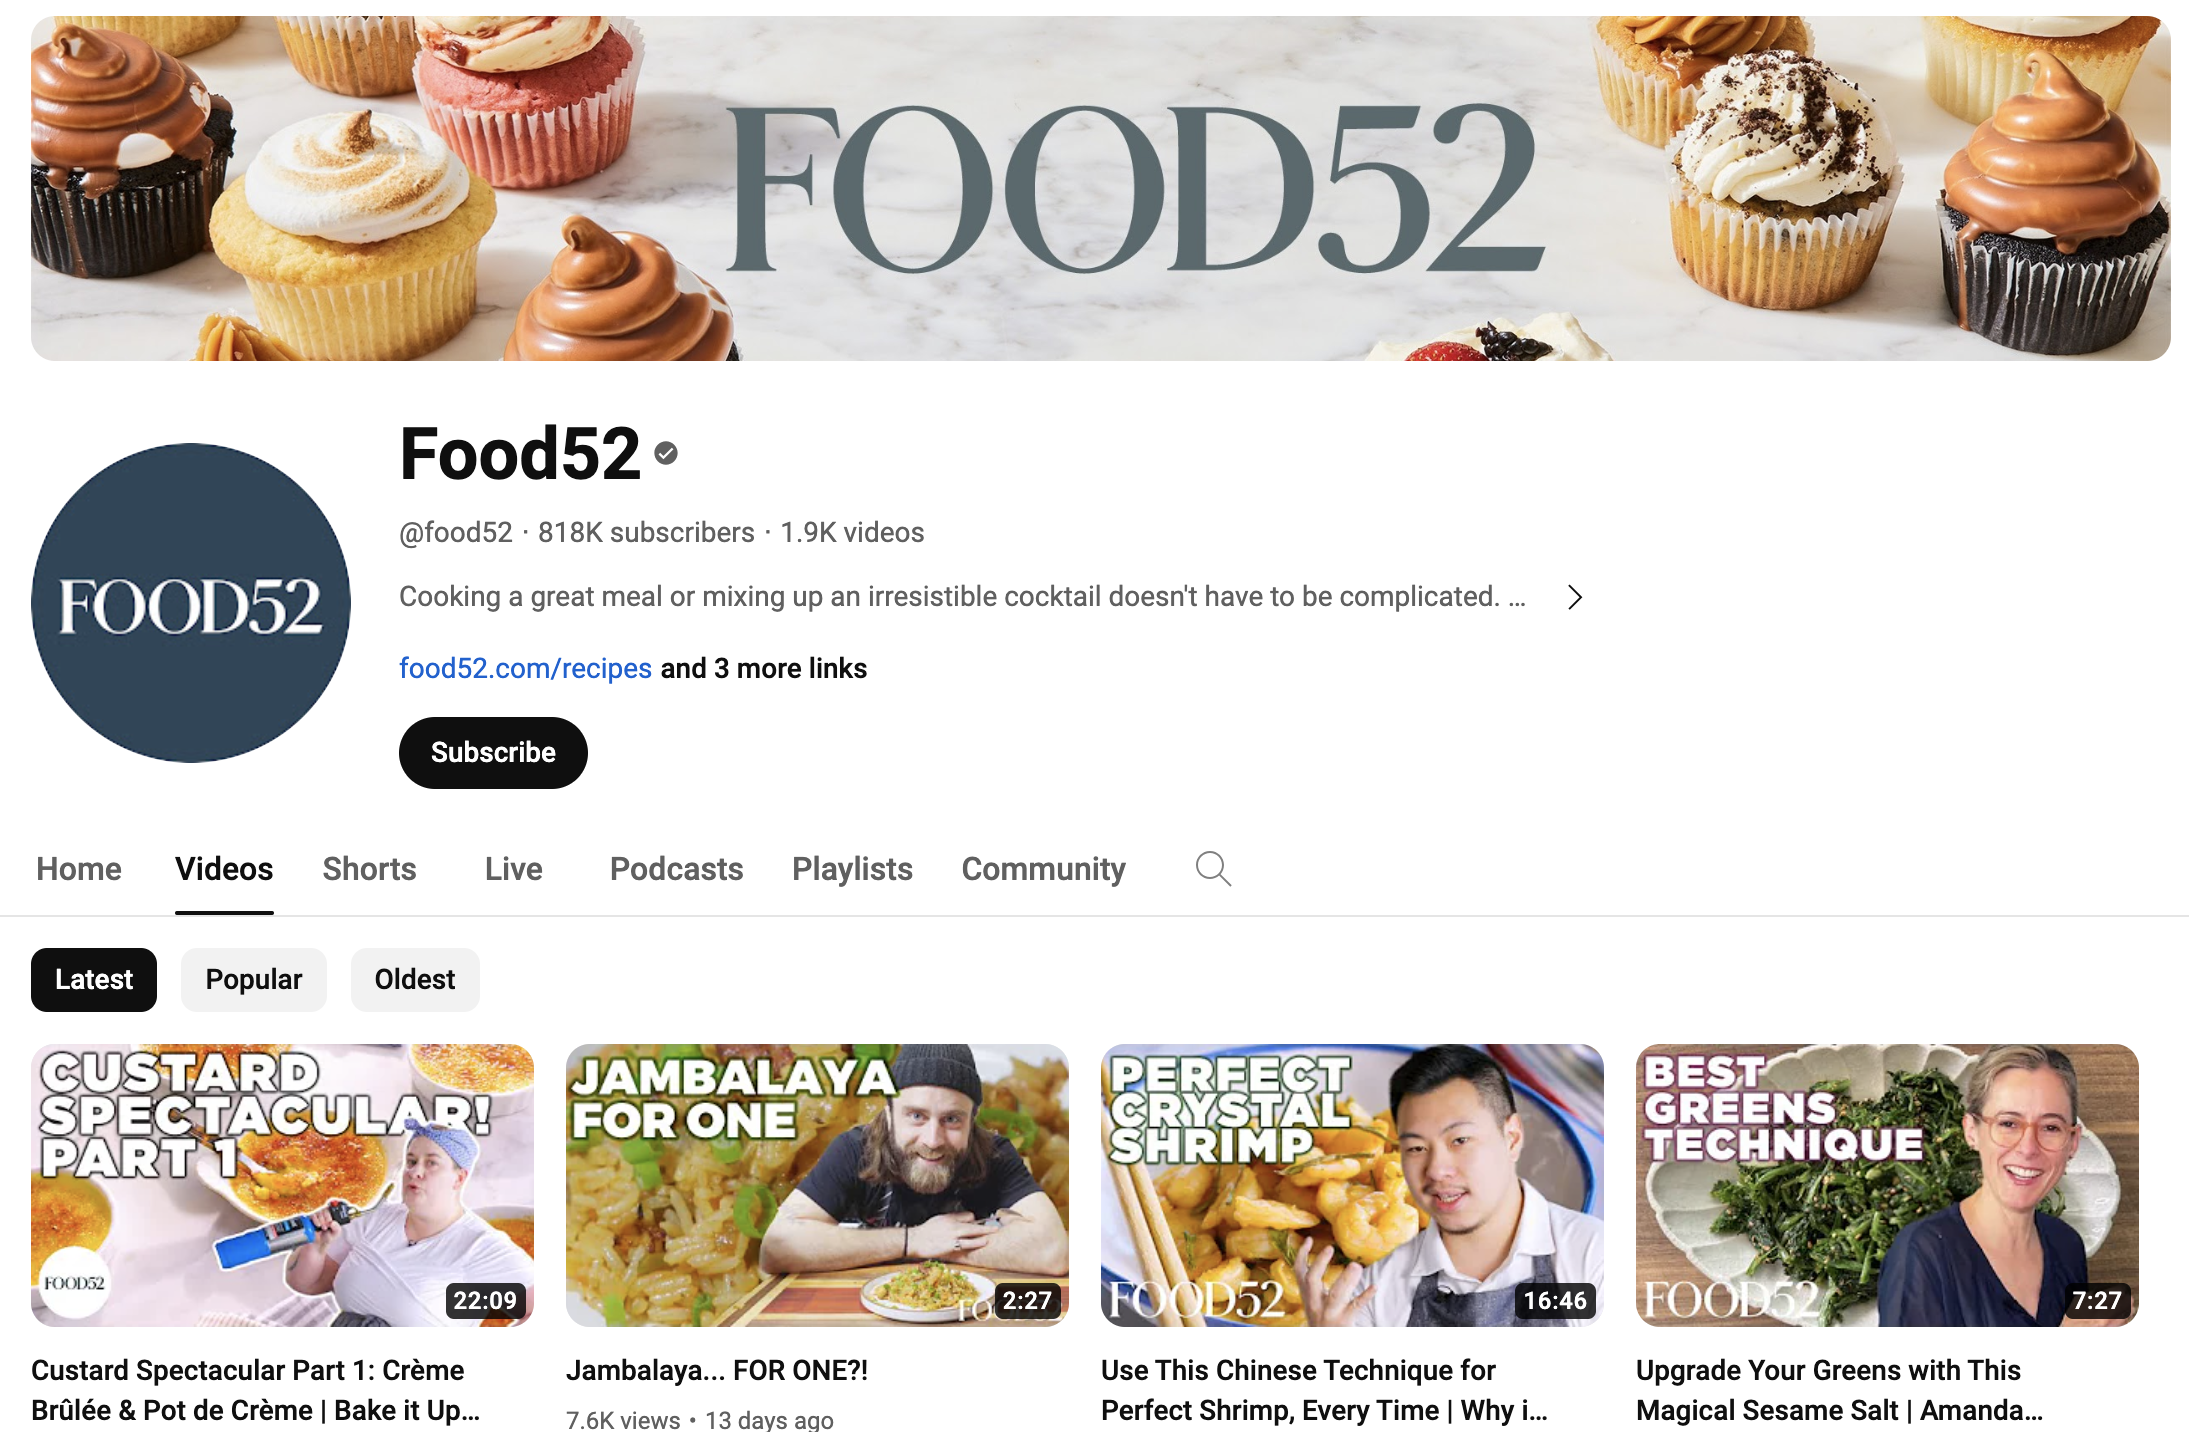 Screenshot of video page for YouTube cooking channel Food52